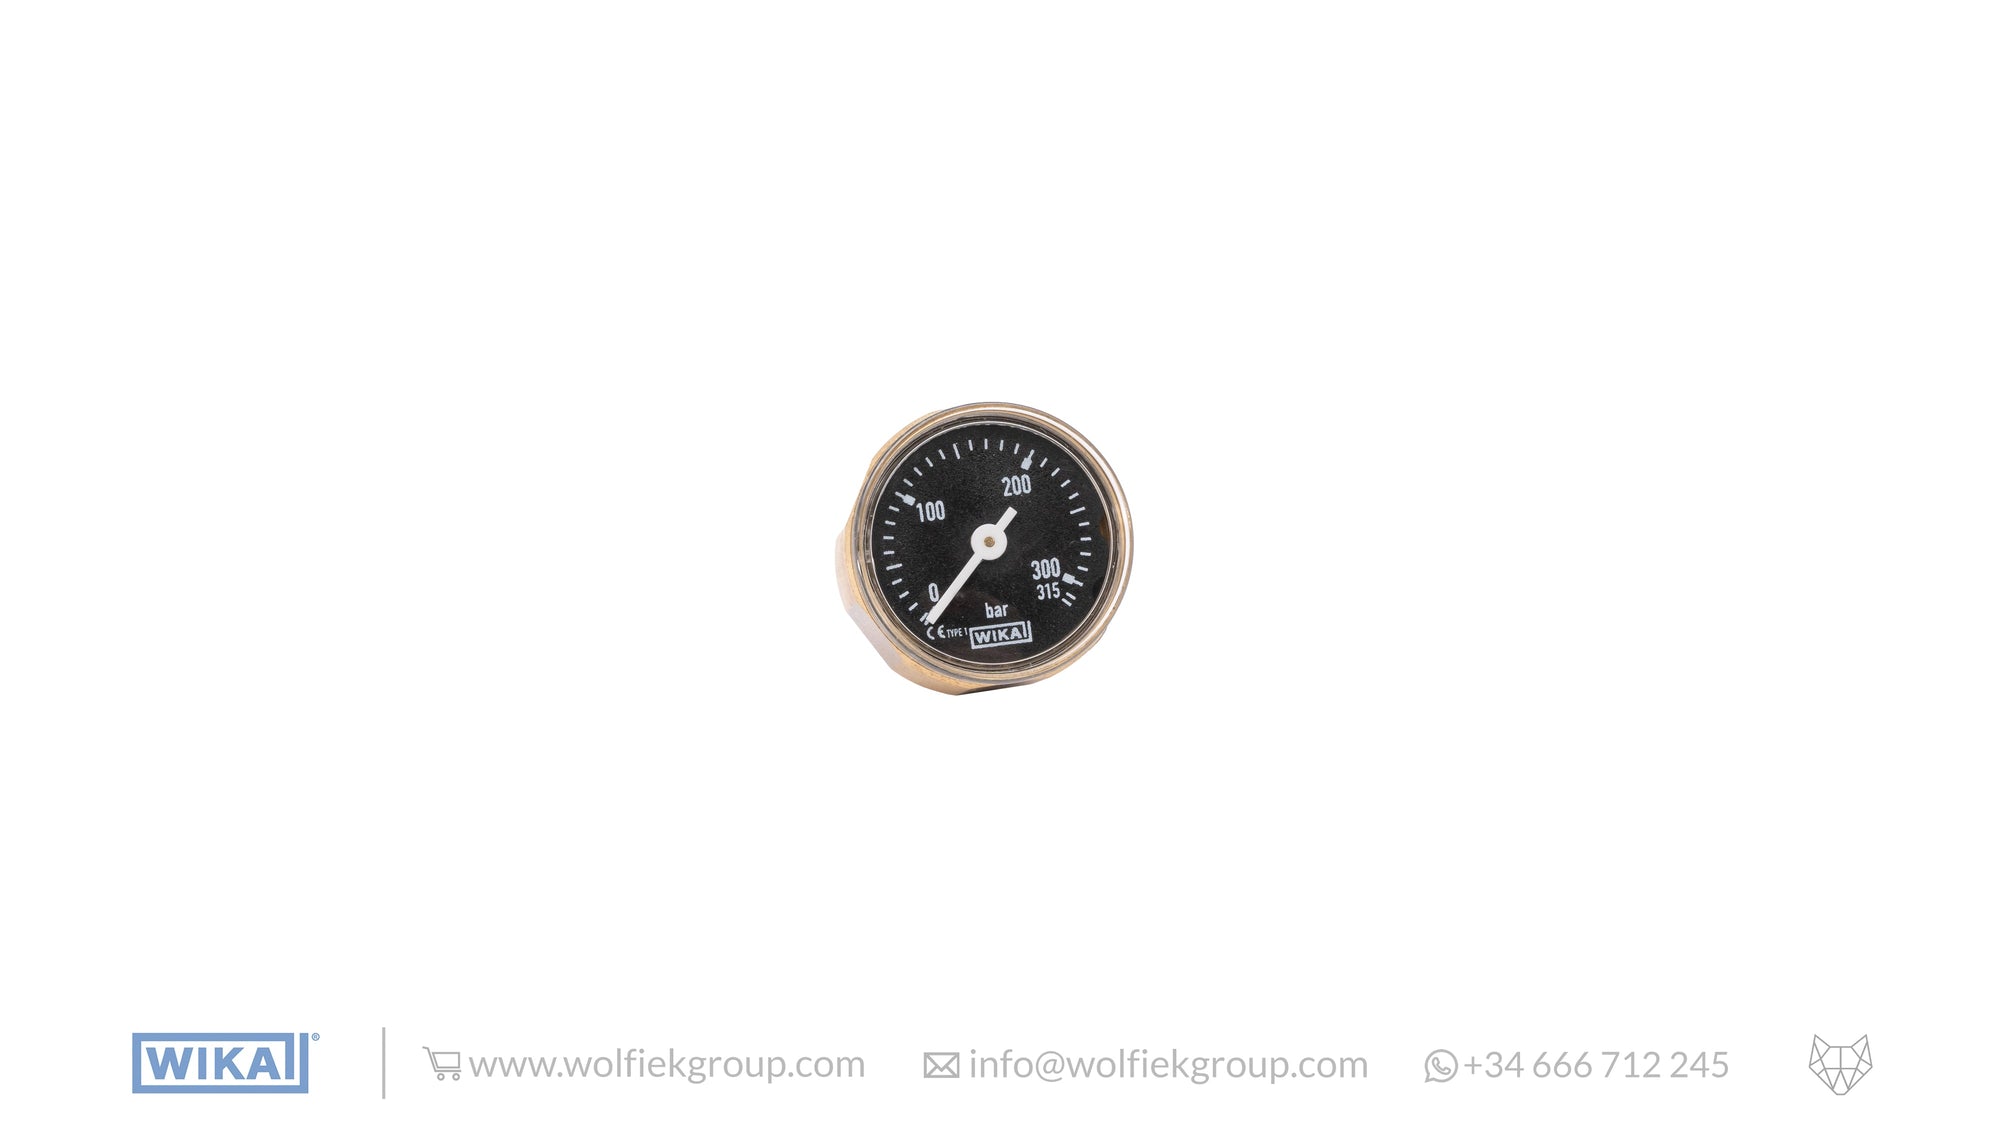 WIKA Analogue Gauge in black limited edition